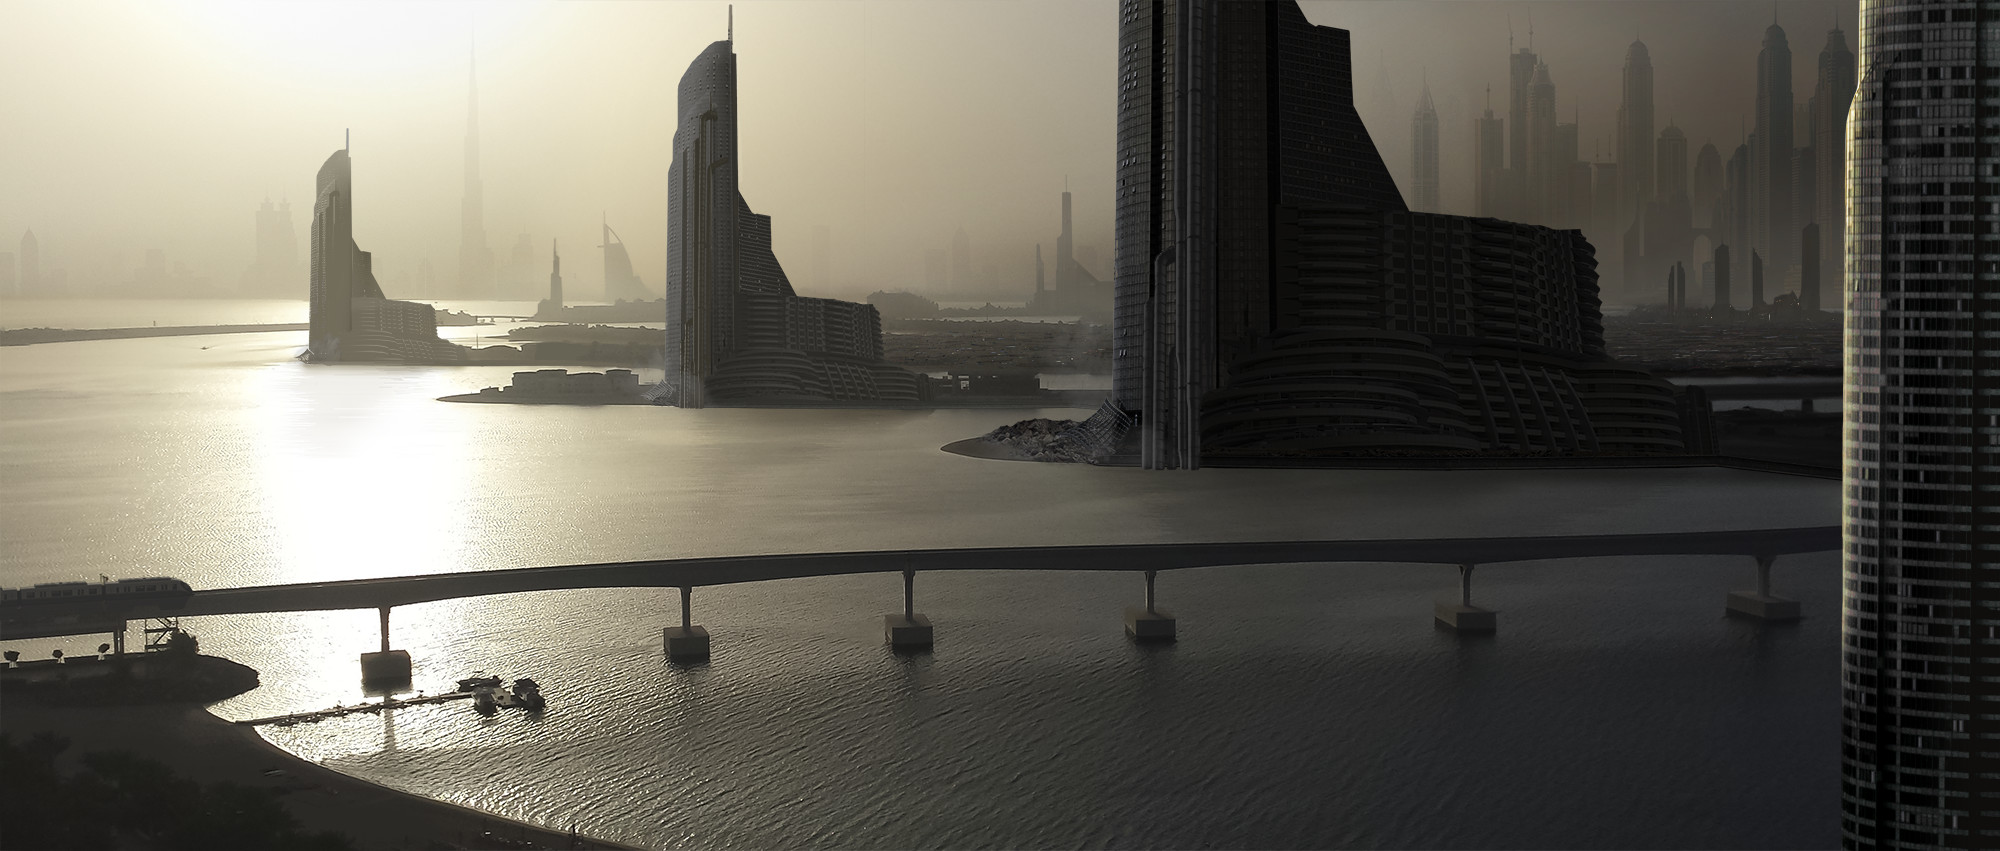 Desalinator Dawn (Sci-Fi Cityscape Matte 2000 px) - updated in May 2019 based on feedback